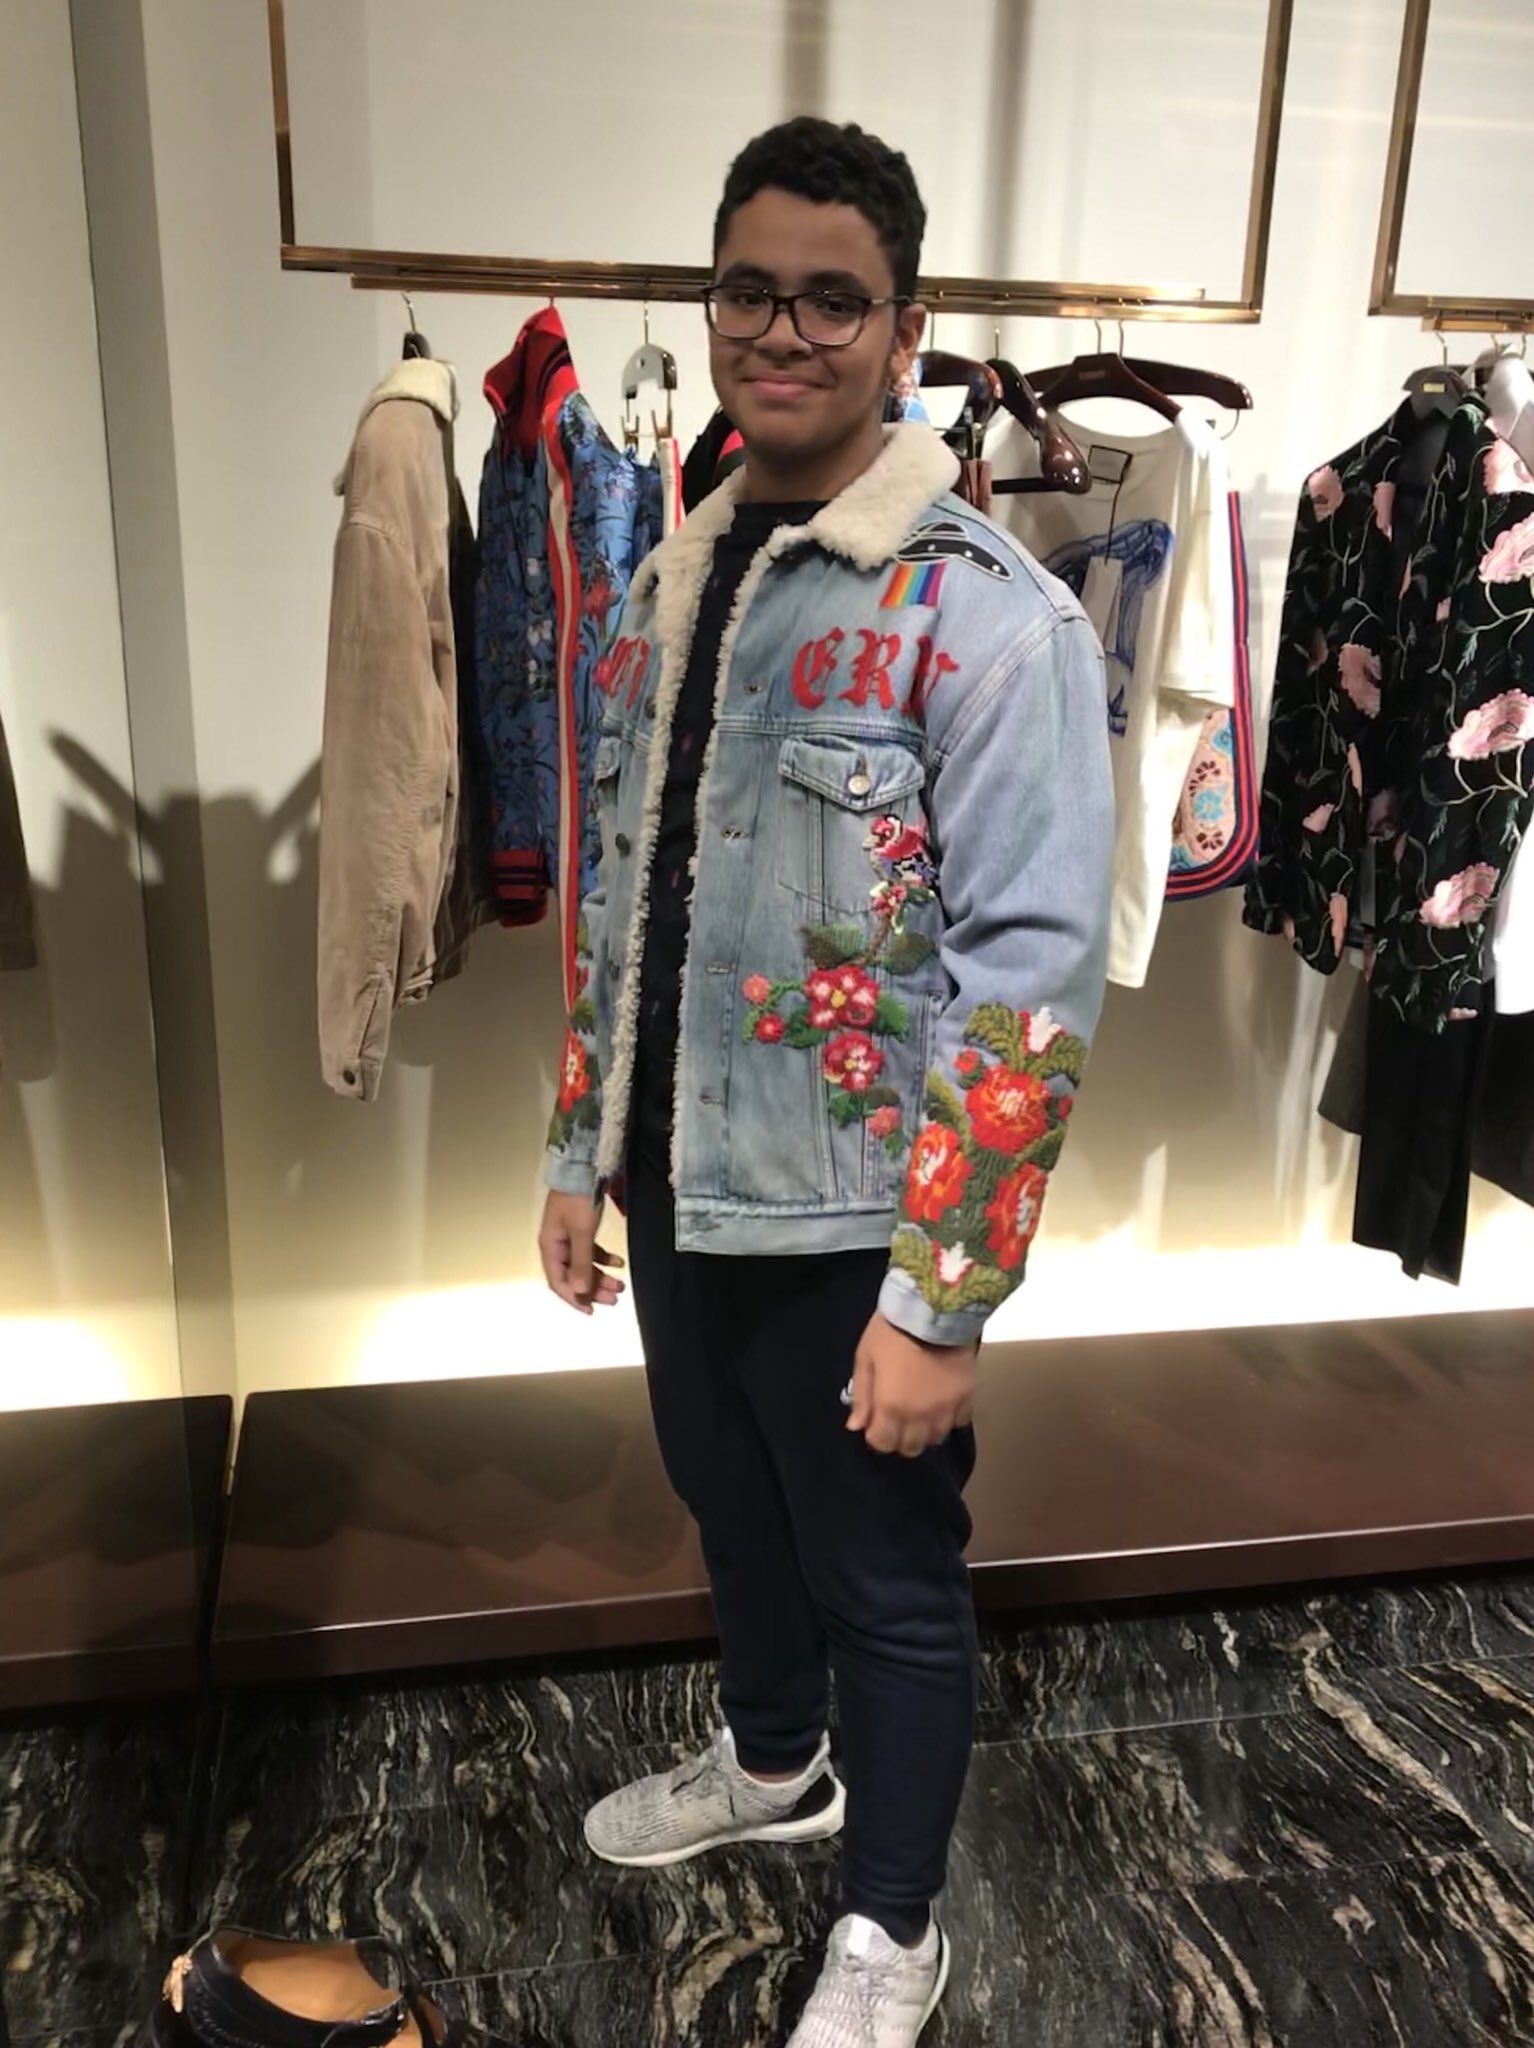 Afstemning mikrofon Lake Taupo Aly on Twitter: "Wearing Logan's paul one out of five,7500$ jackettt @ LoganPaul @gucci #loganpaul @gucci #jacket https://t.co/rh5BoH348A" / X